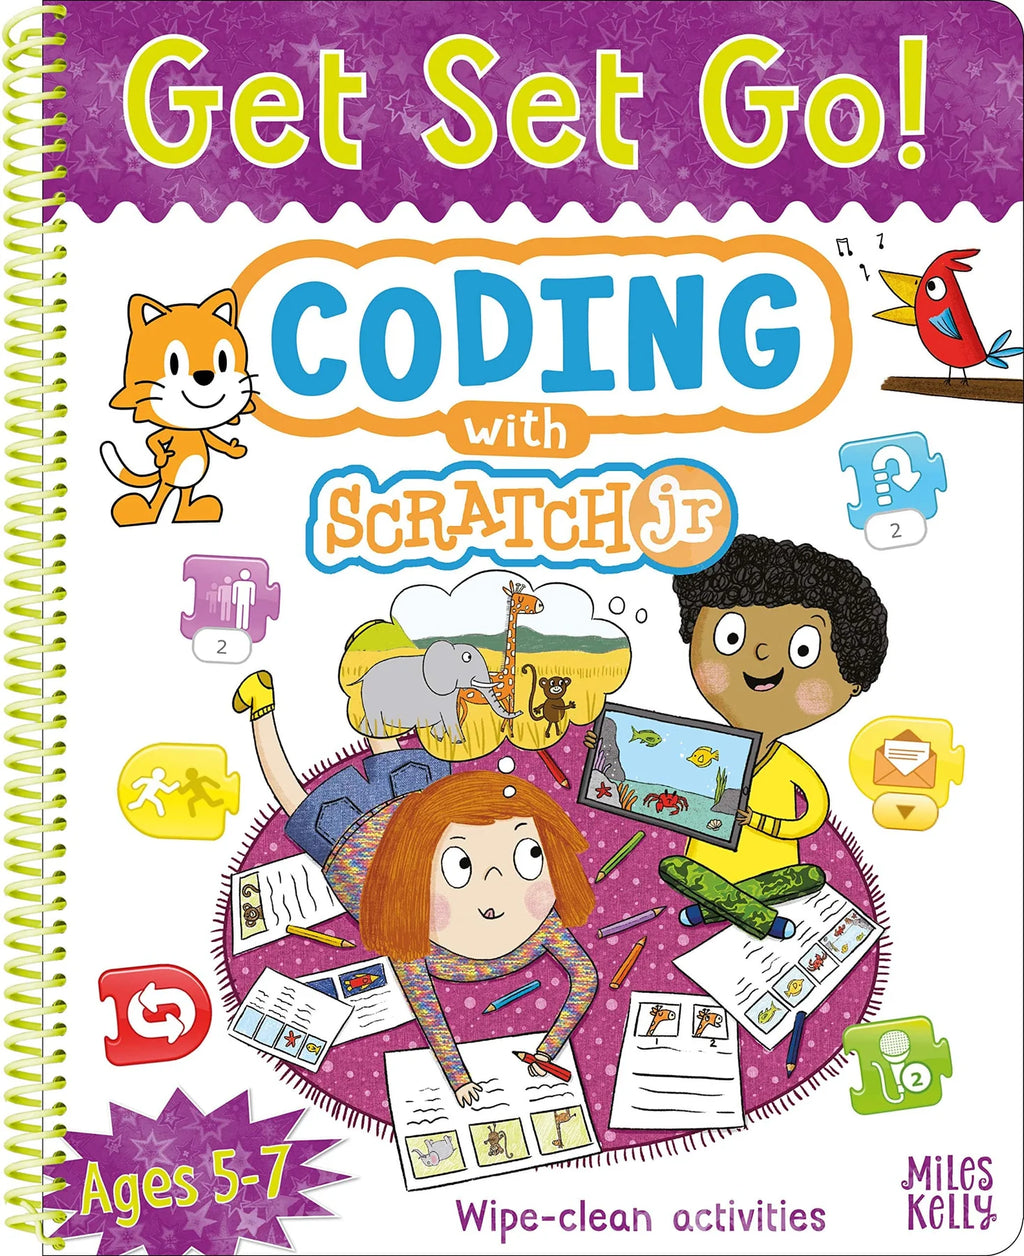 Get set go! Coding with Scratches